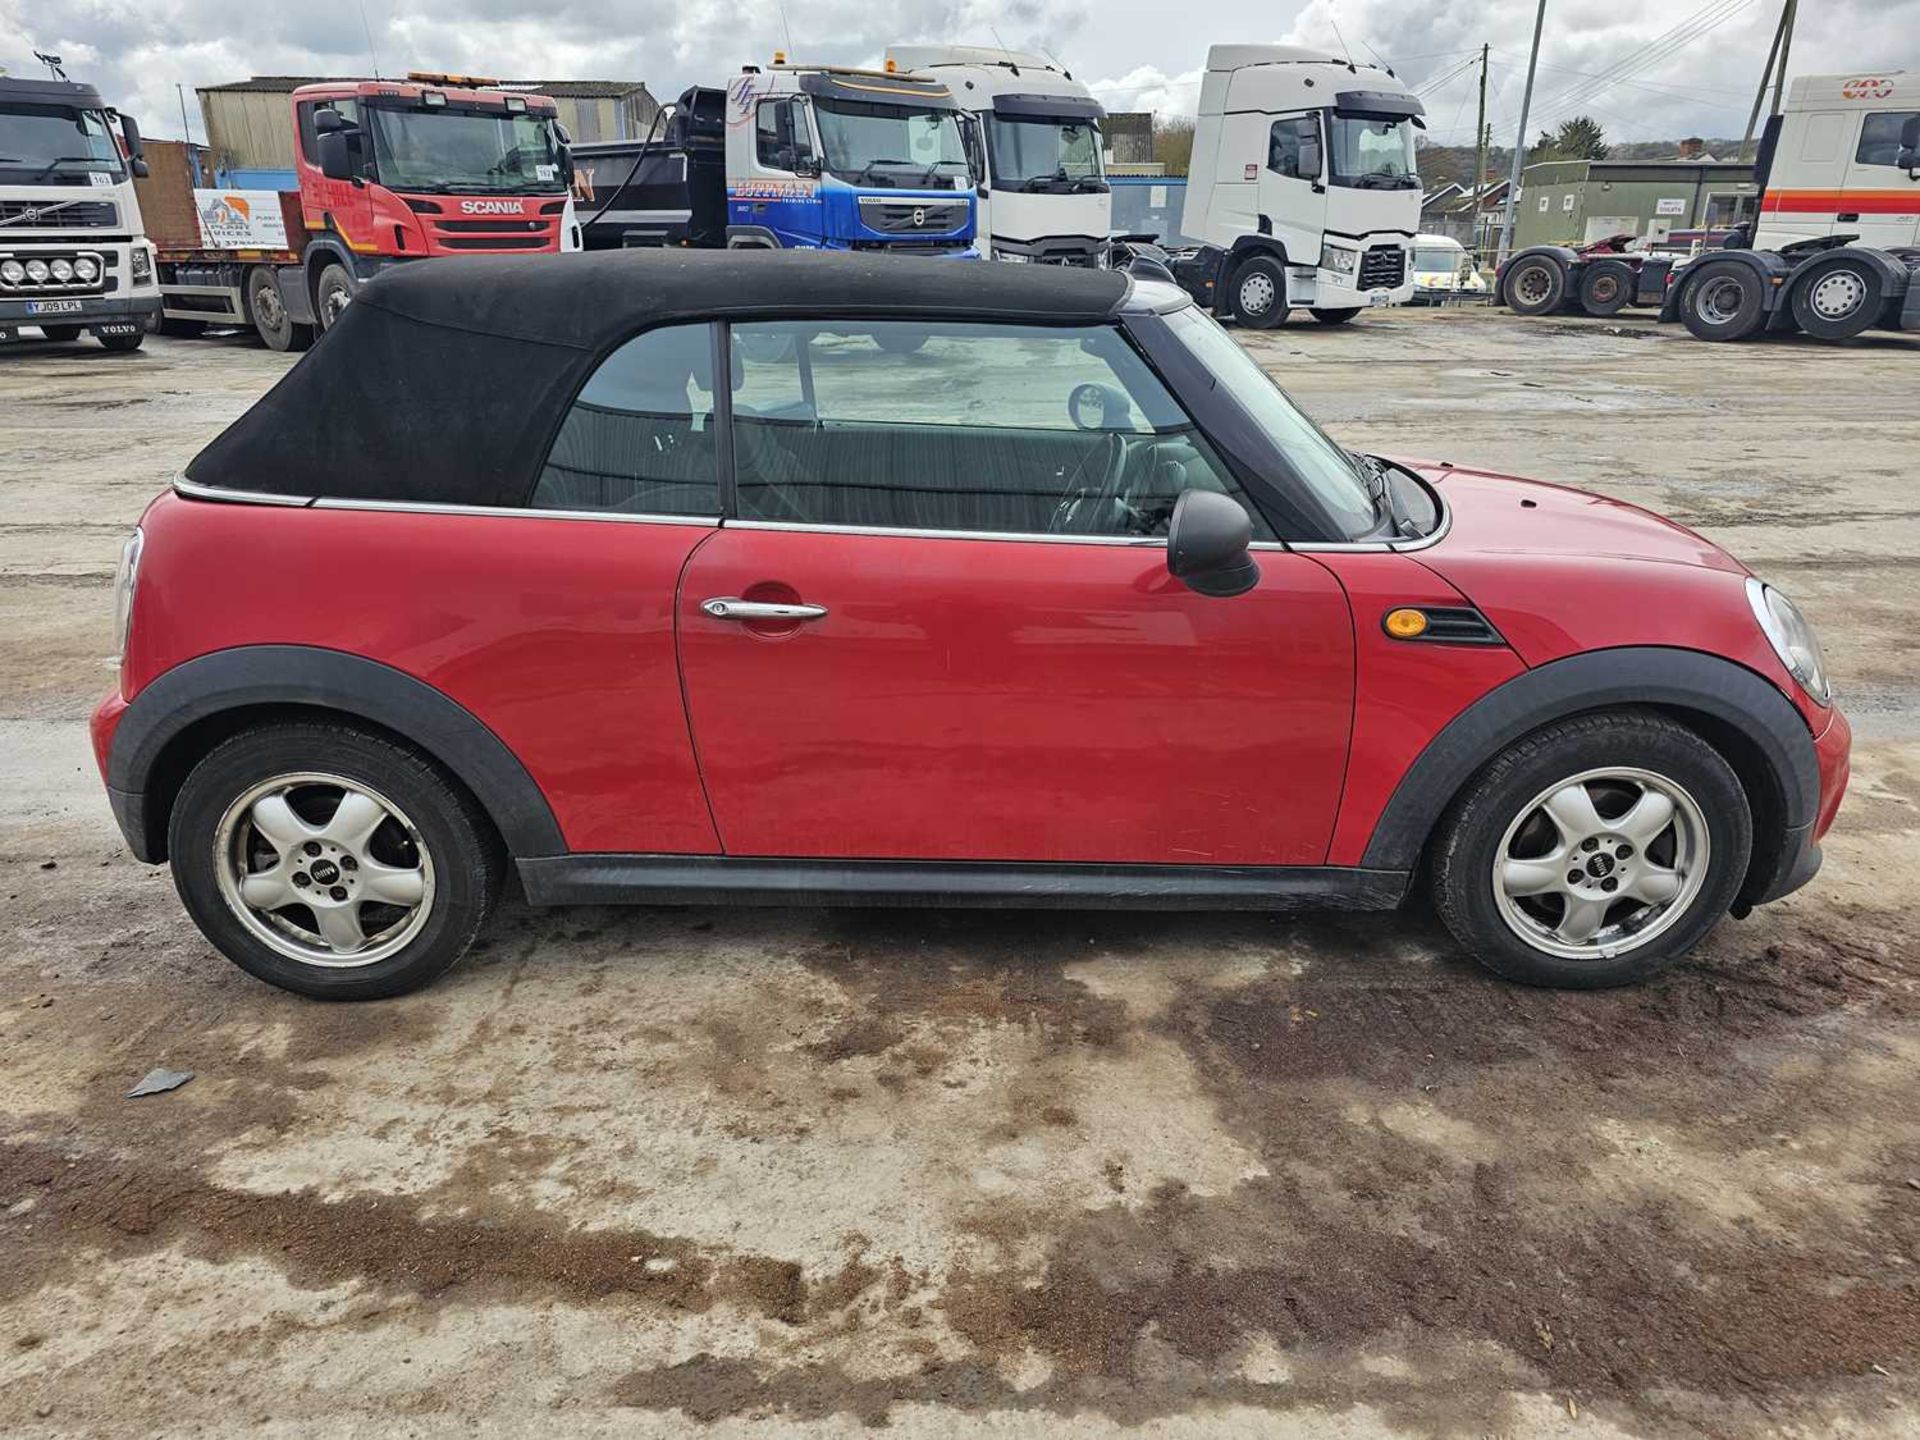 2011 Mini One Convertible, 6 Speed, Bluetooth, Cruise Control, A/C (Reg. Docs. Available) - Image 7 of 25